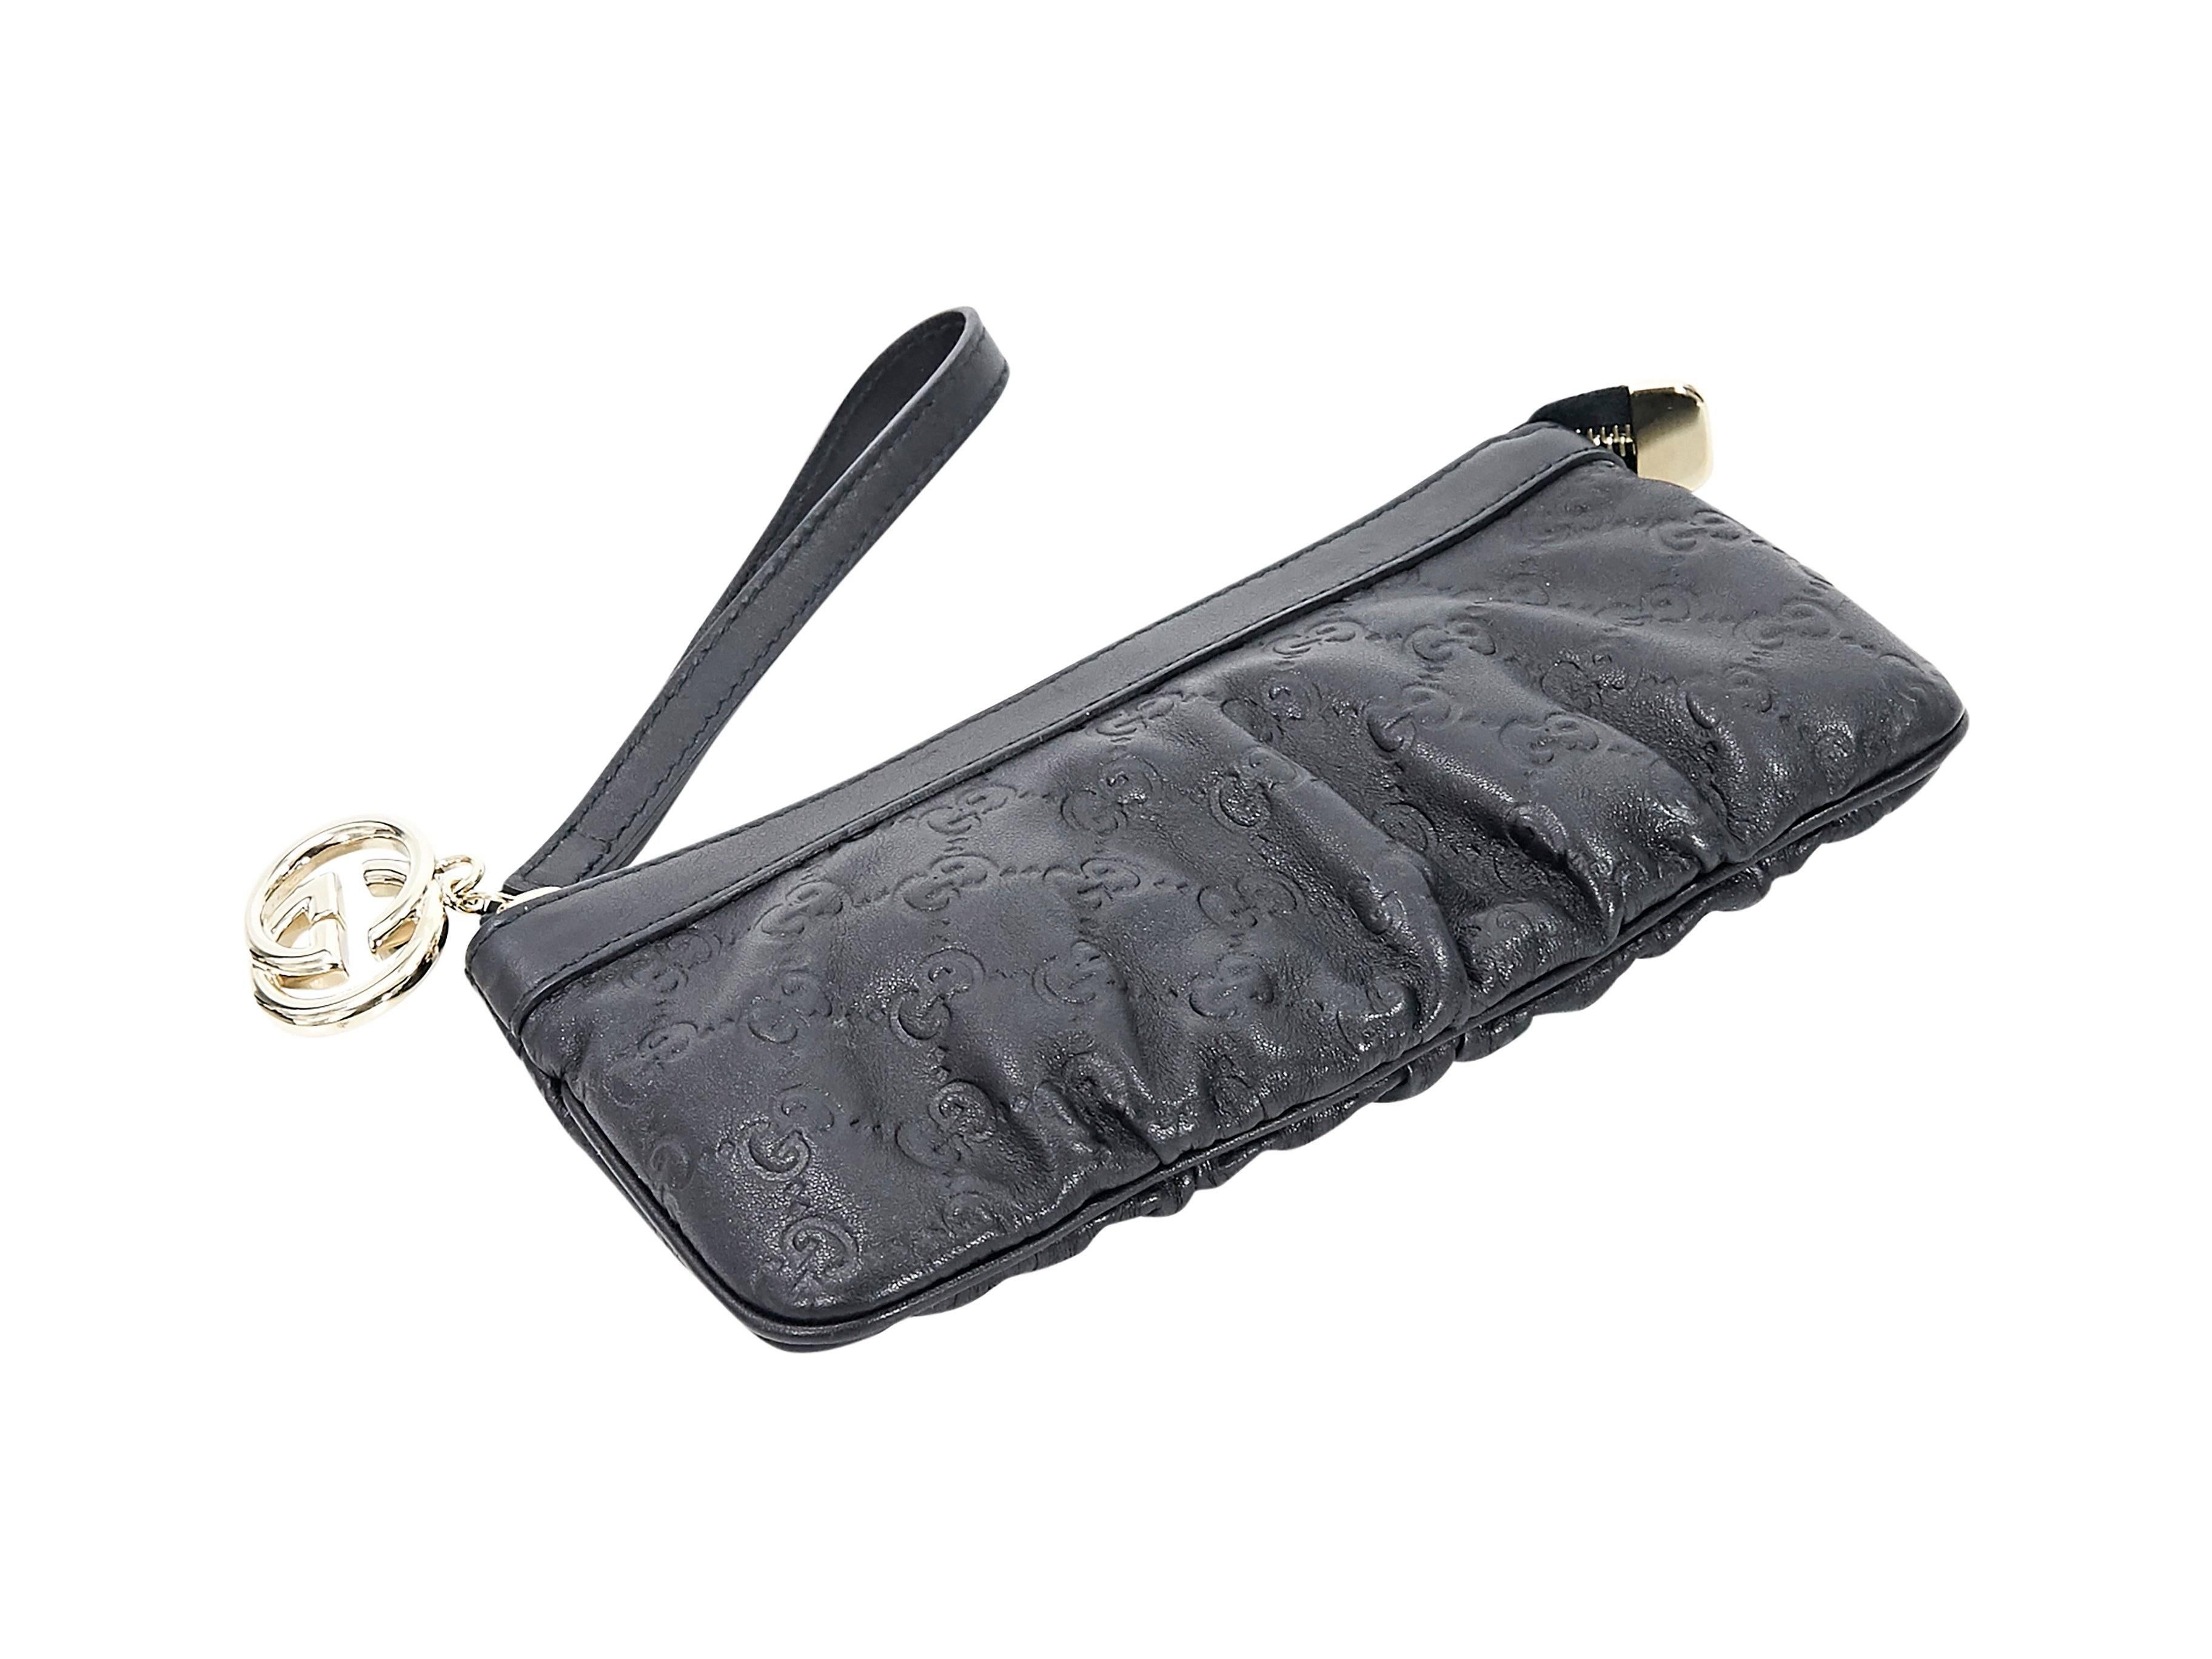 Product details:  Black embossed leather Guccissima wristlet by Gucci.  Wristlet strap.  Top zip closure with logo zipper pull.  Lined interior.  Goldtone hardware.  8.5